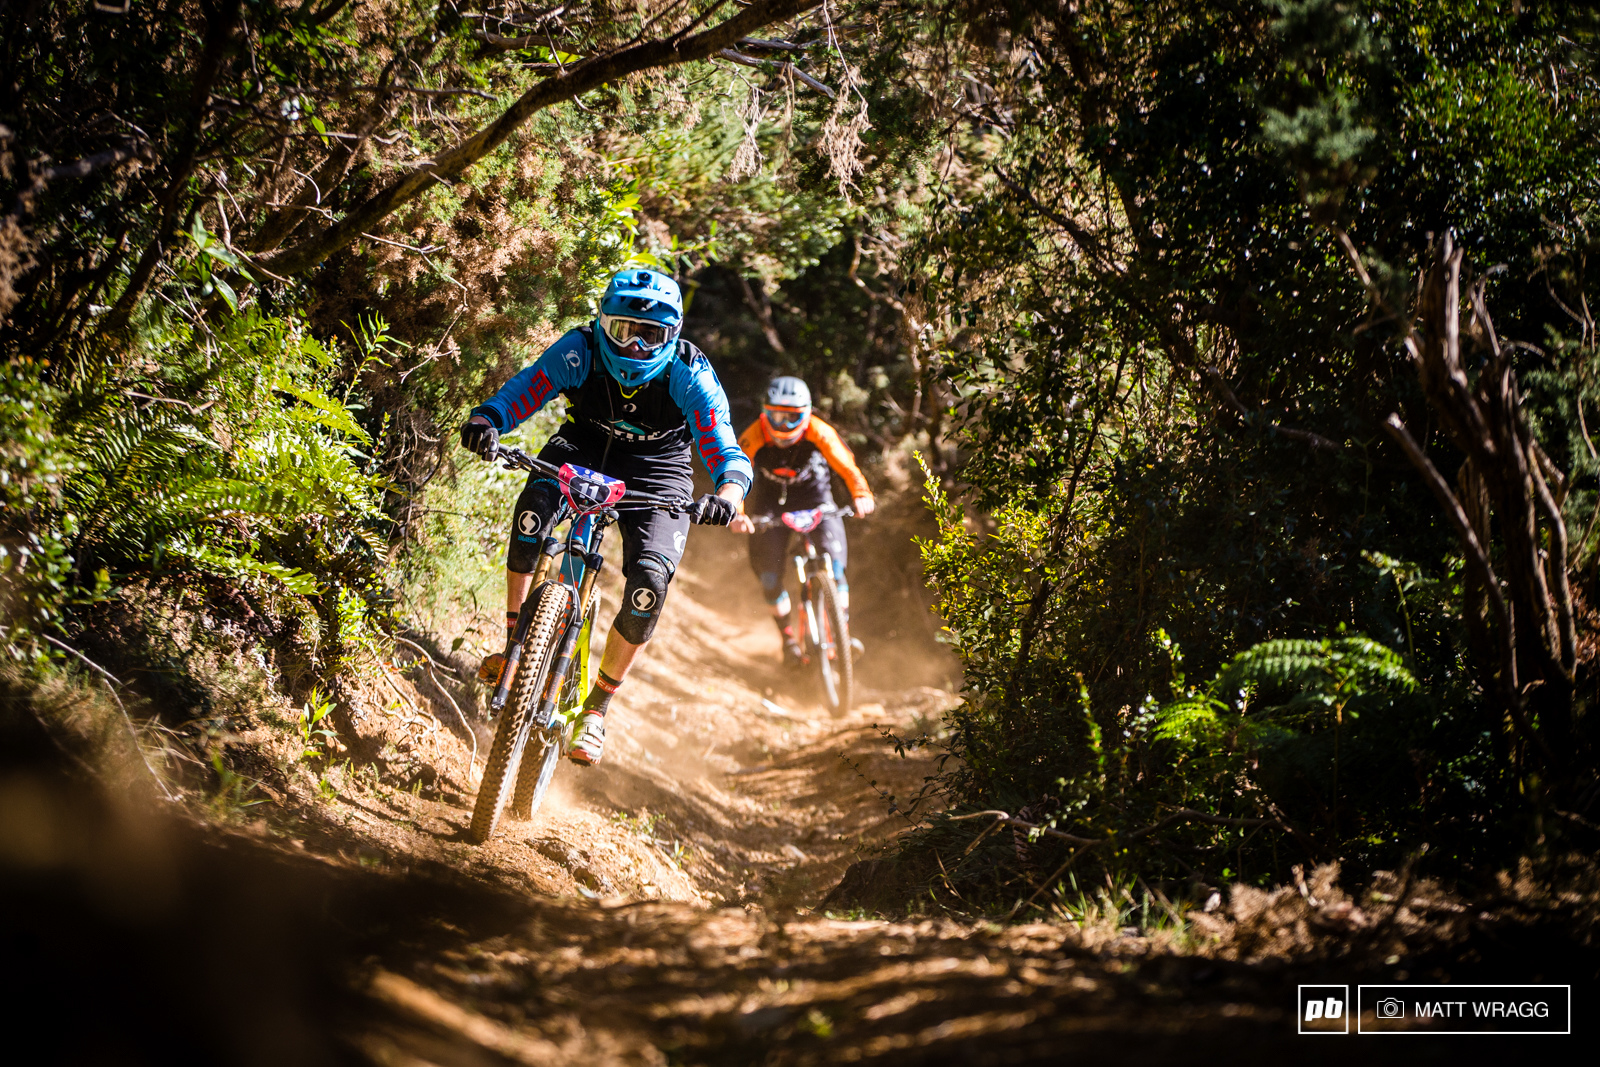 Francois Bailly-Maitre knows how to ride fast here in Chile. Earlier this year he beat Jerome Clementz at the Andes Pacifico stage race here. With a lot to prove this season he certainly looks like he is up to speed in practice.